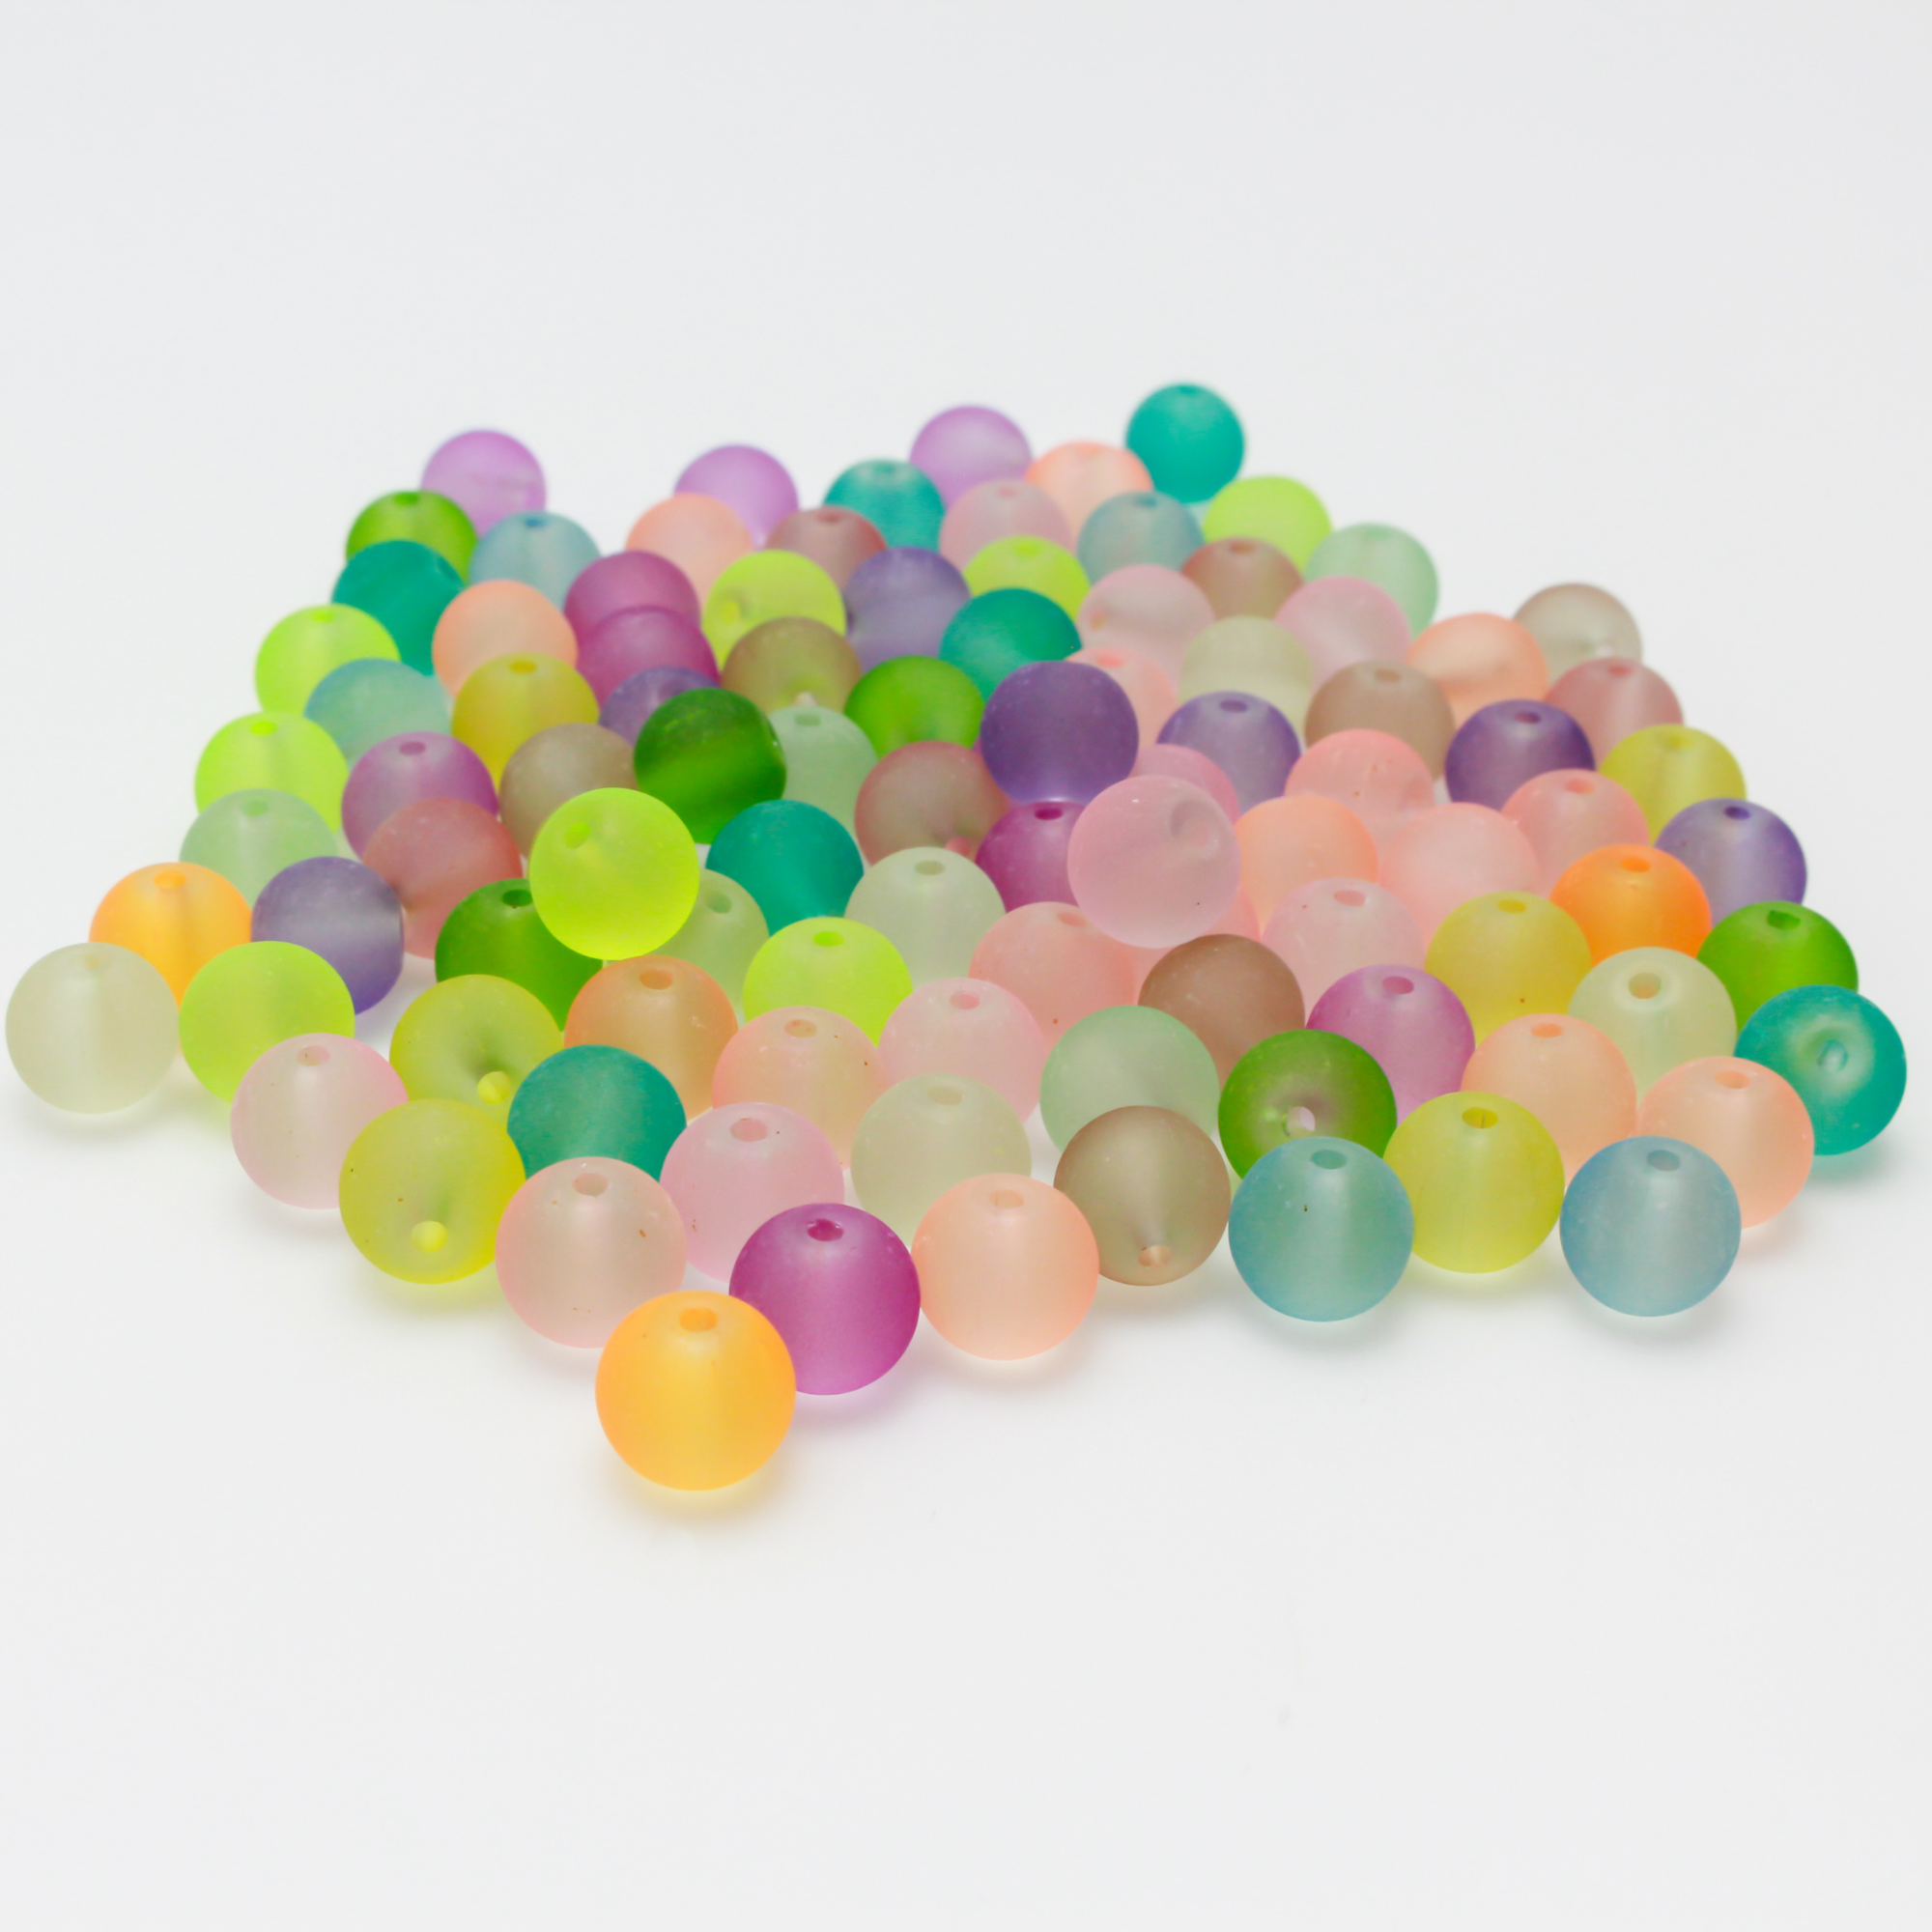 Transparent frosted glass beads in a random mix of colors, 8mm x 7mm